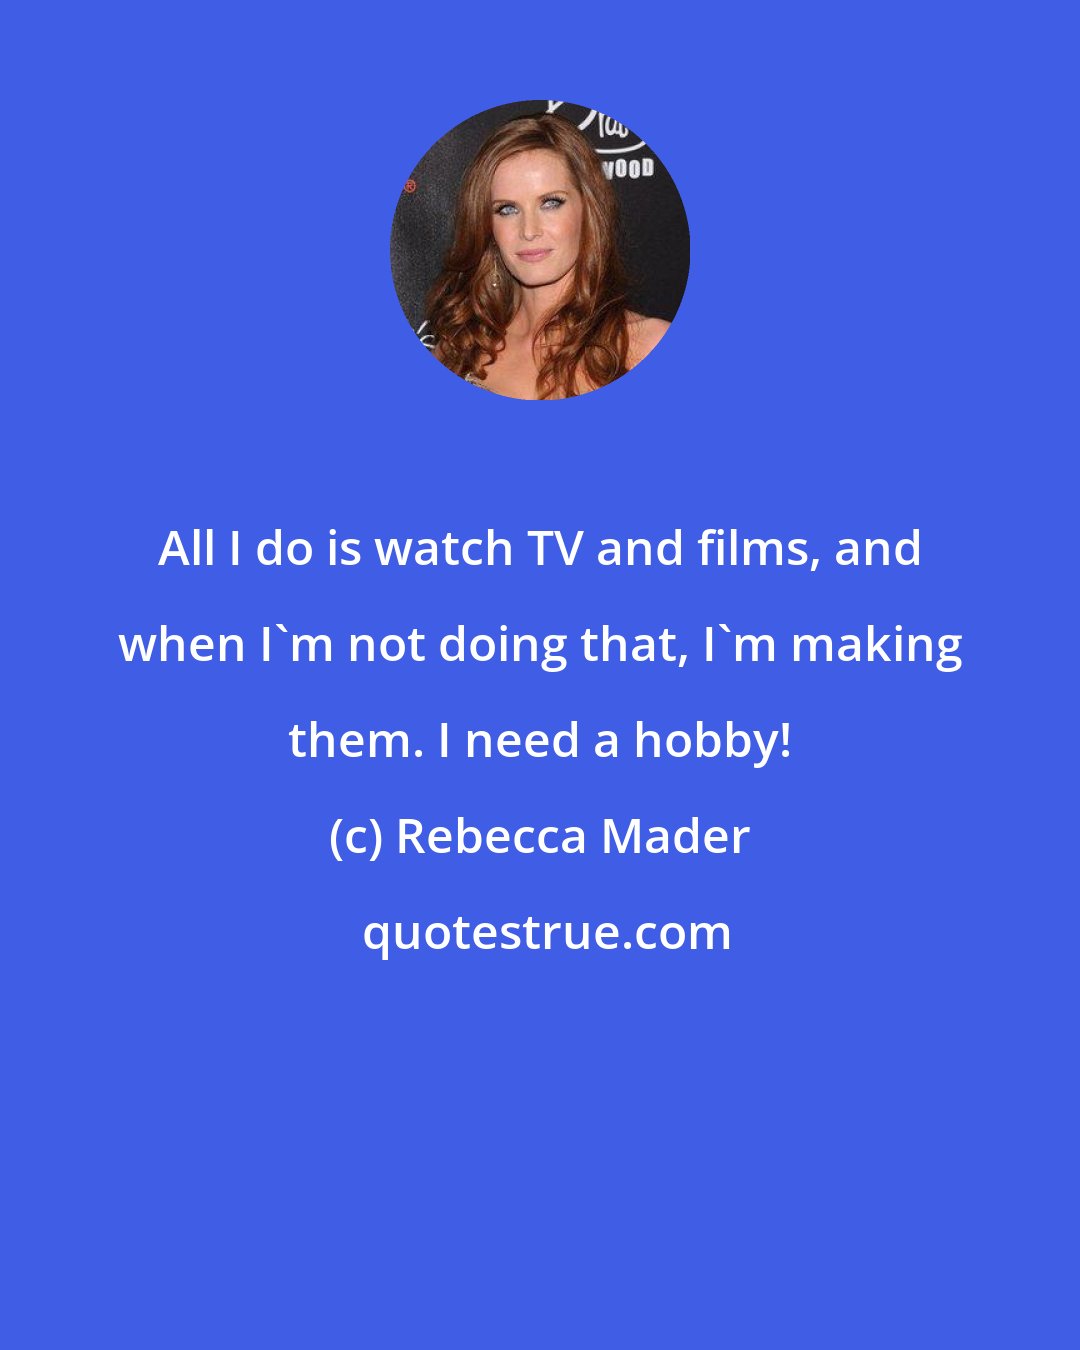 Rebecca Mader: All I do is watch TV and films, and when I'm not doing that, I'm making them. I need a hobby!